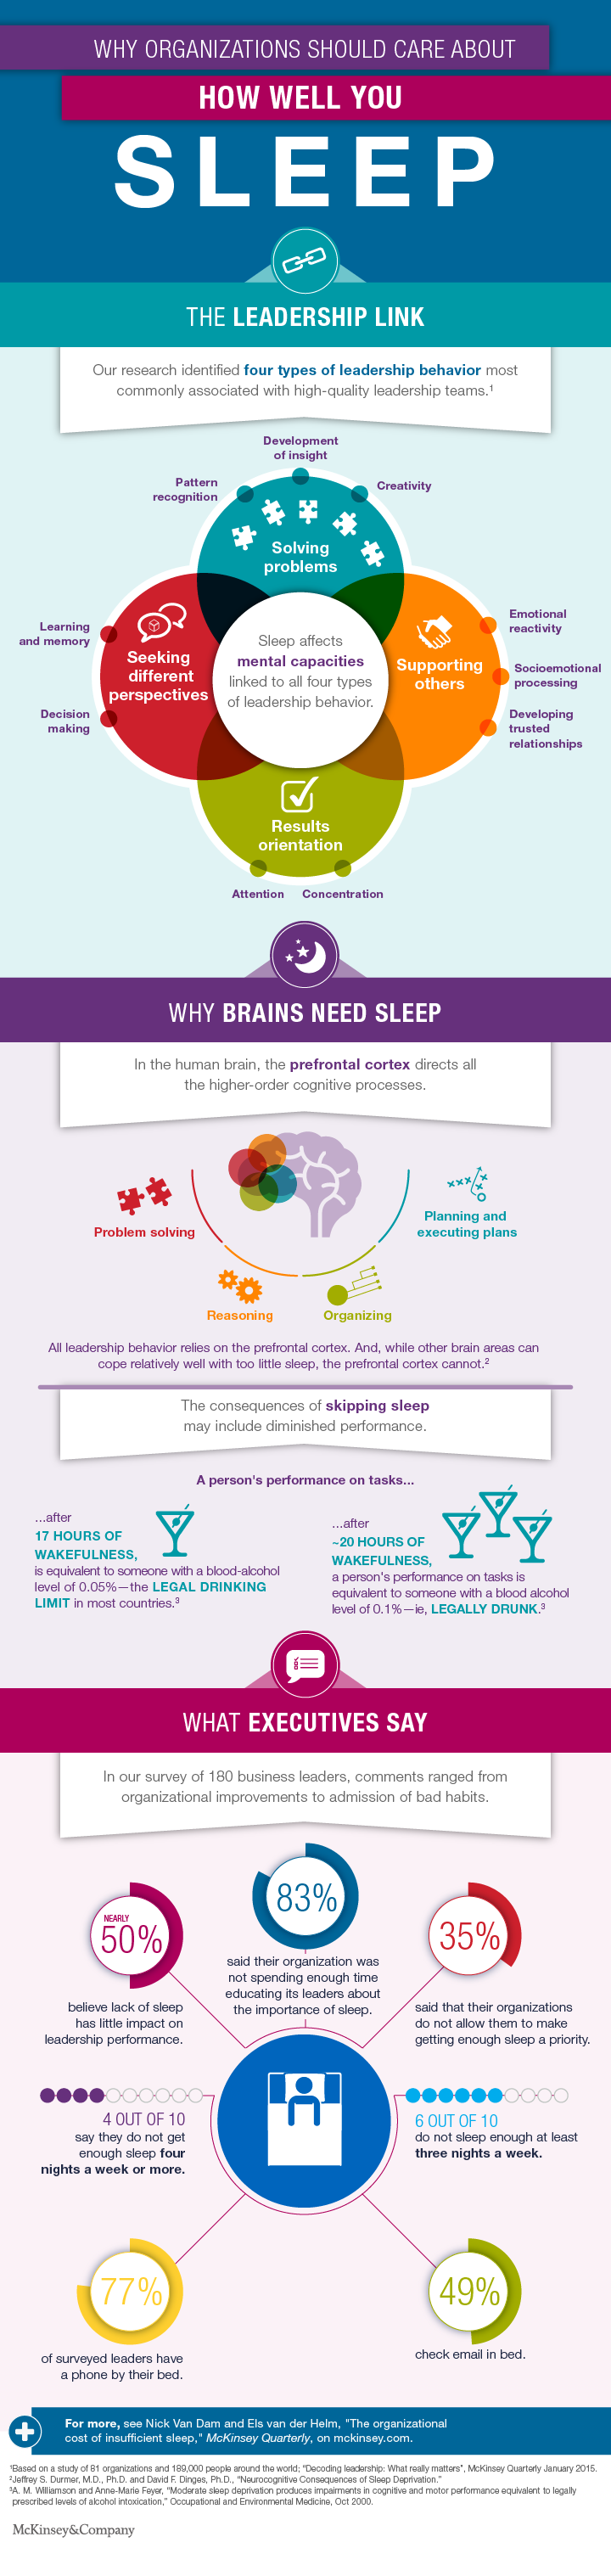 The Organizational Cost of Insufficient Sleep | Visual.ly